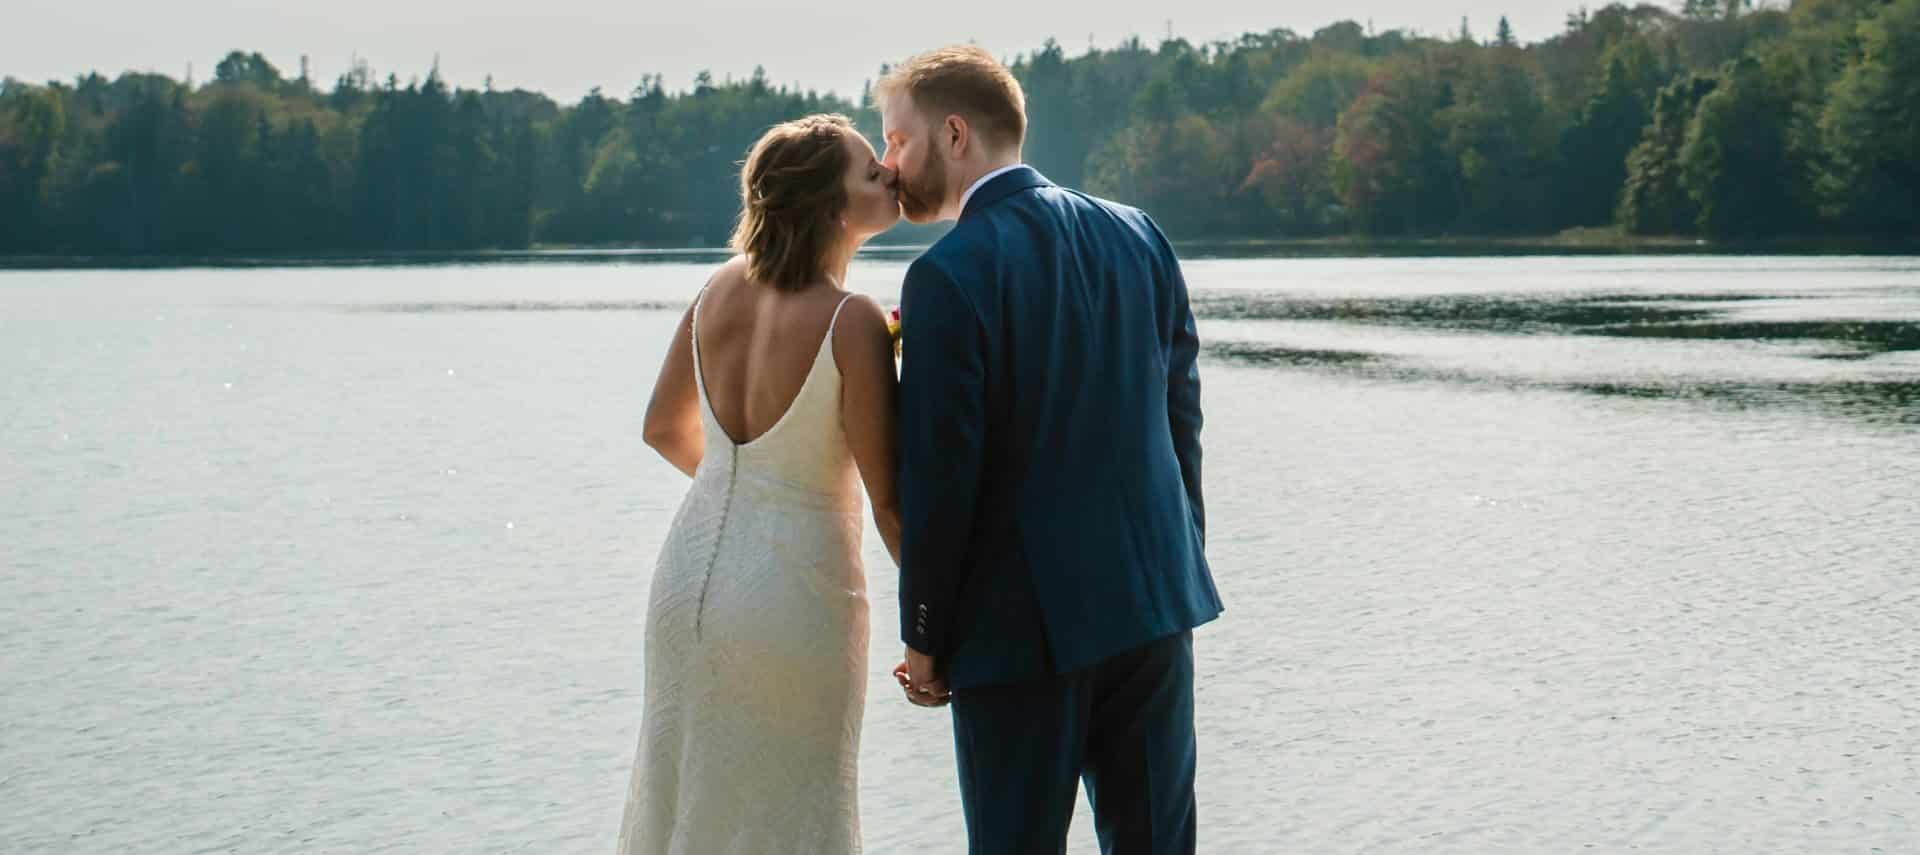 couple in wedding attire kissing overlooking body of water, Mill Pond